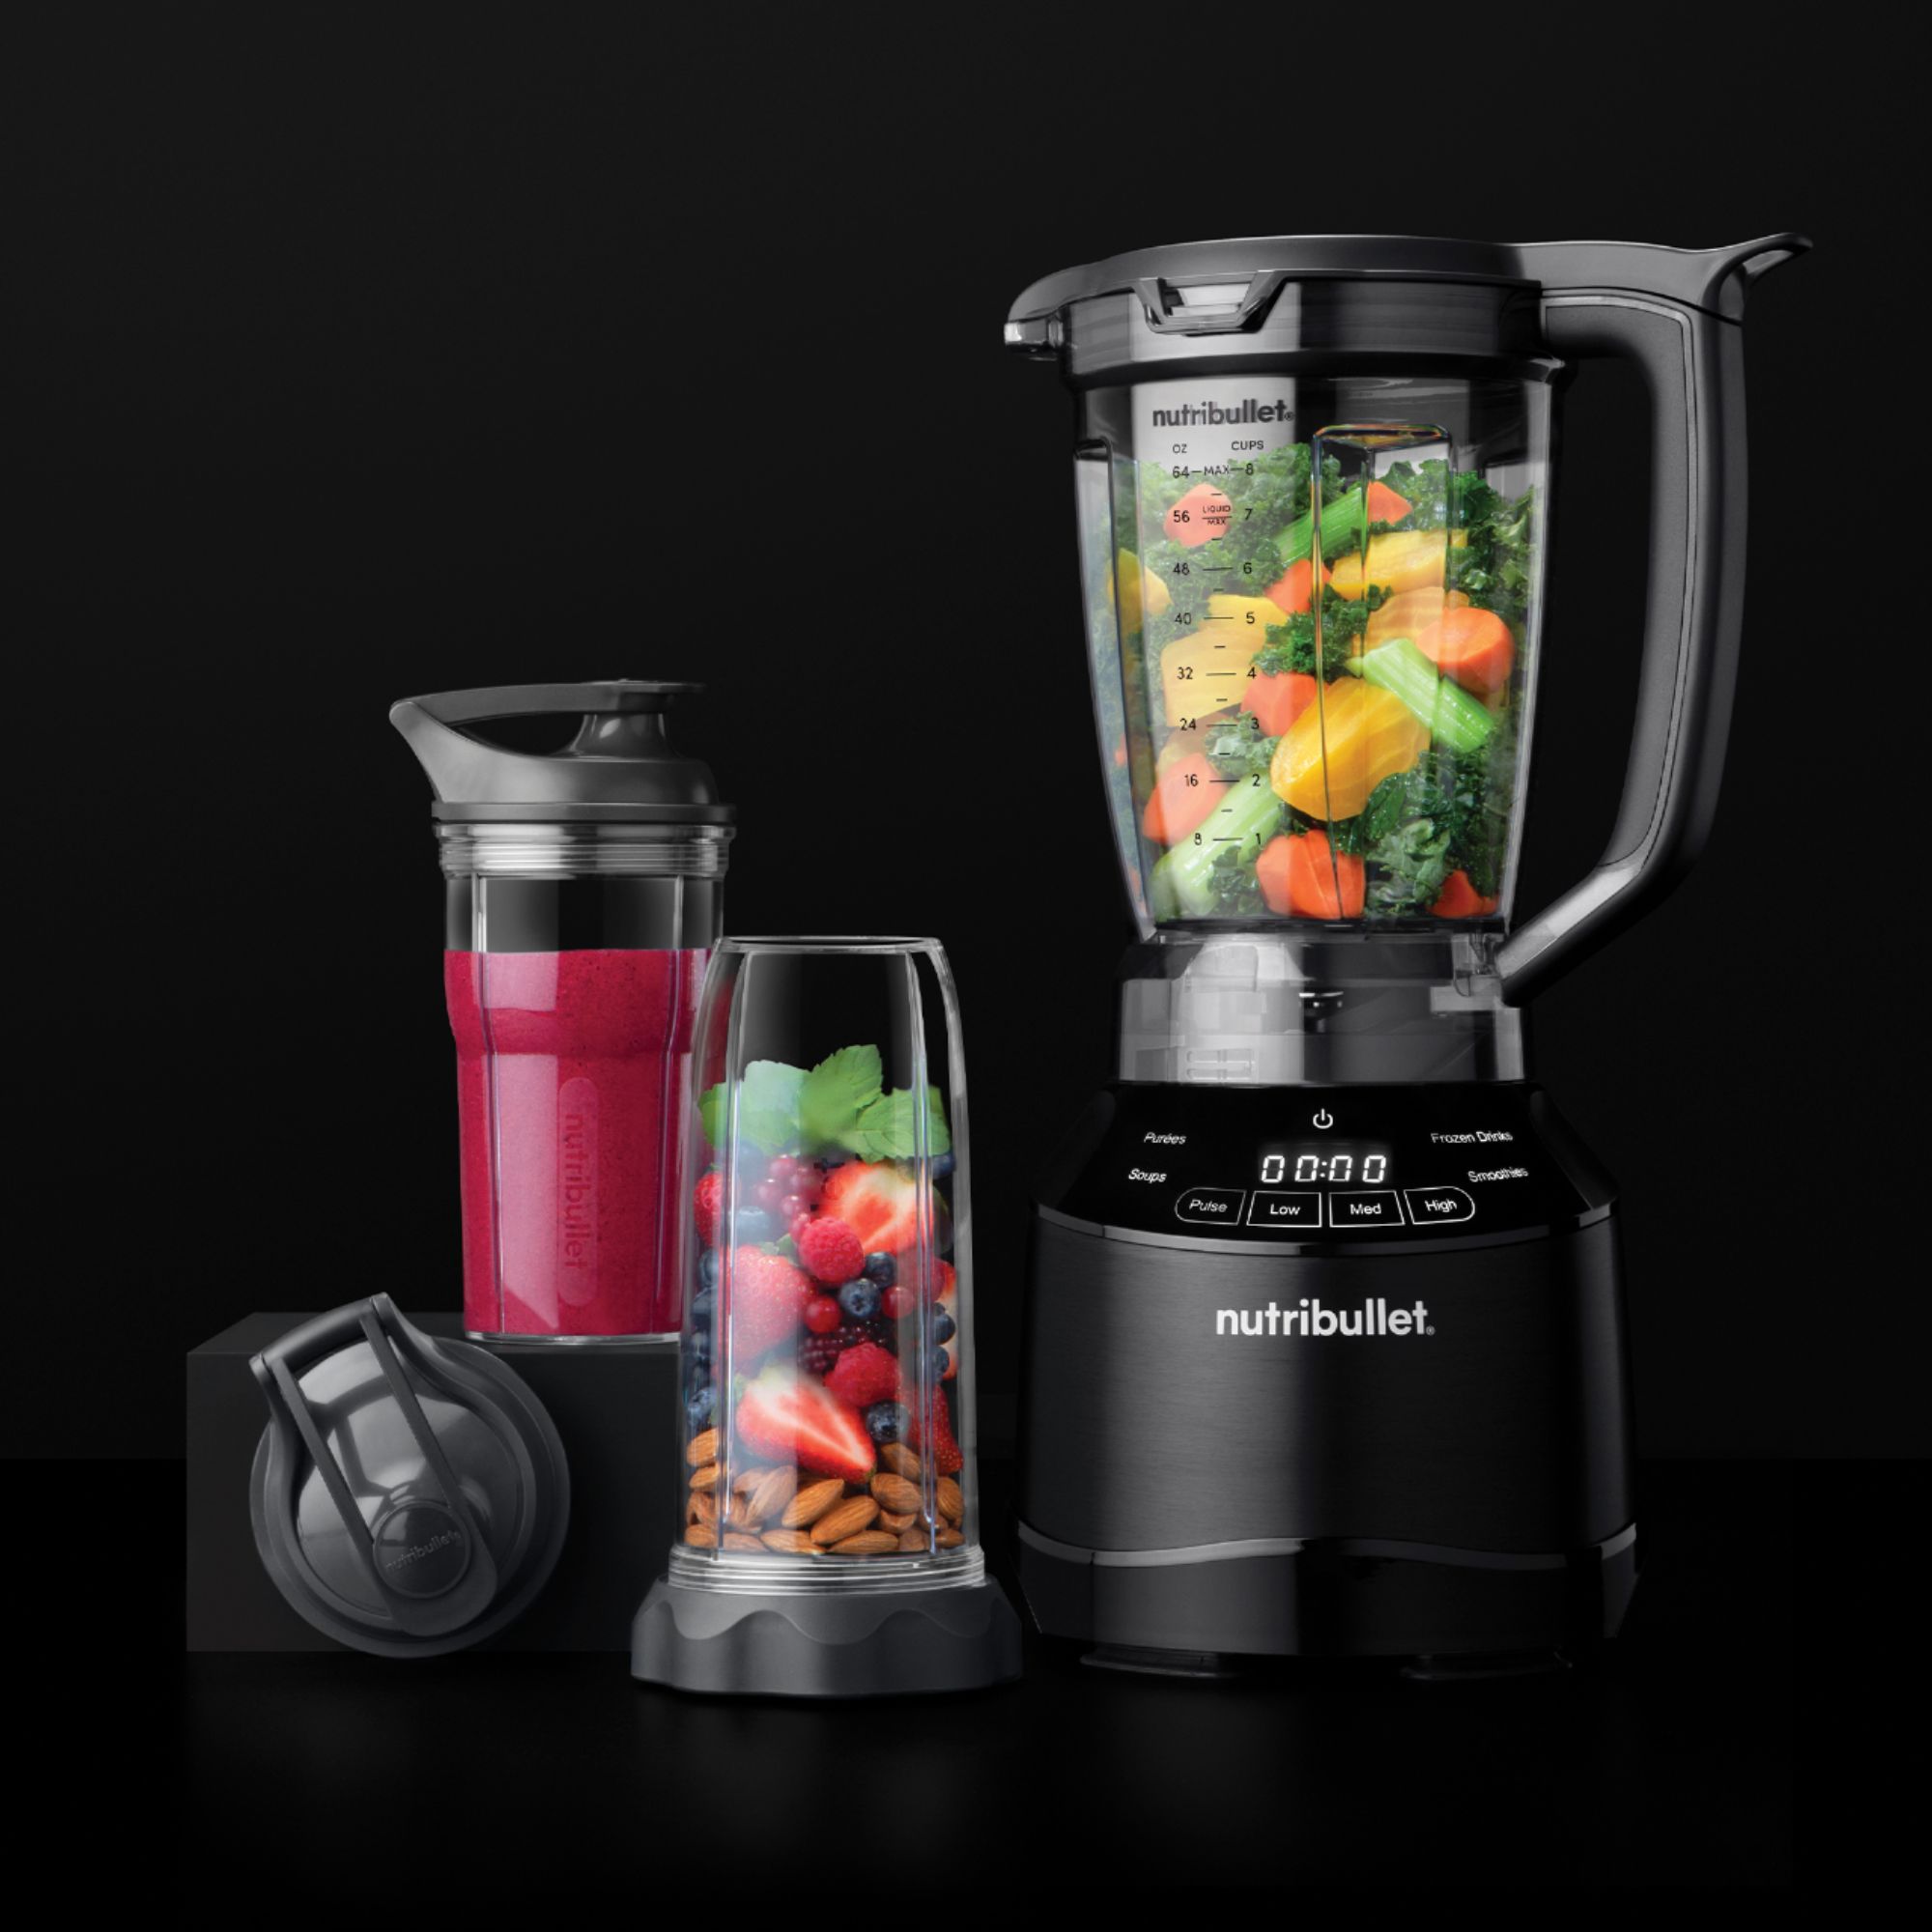 NutriBullet® Blender Combo with Single Serve Cups, 1000W - Mixers